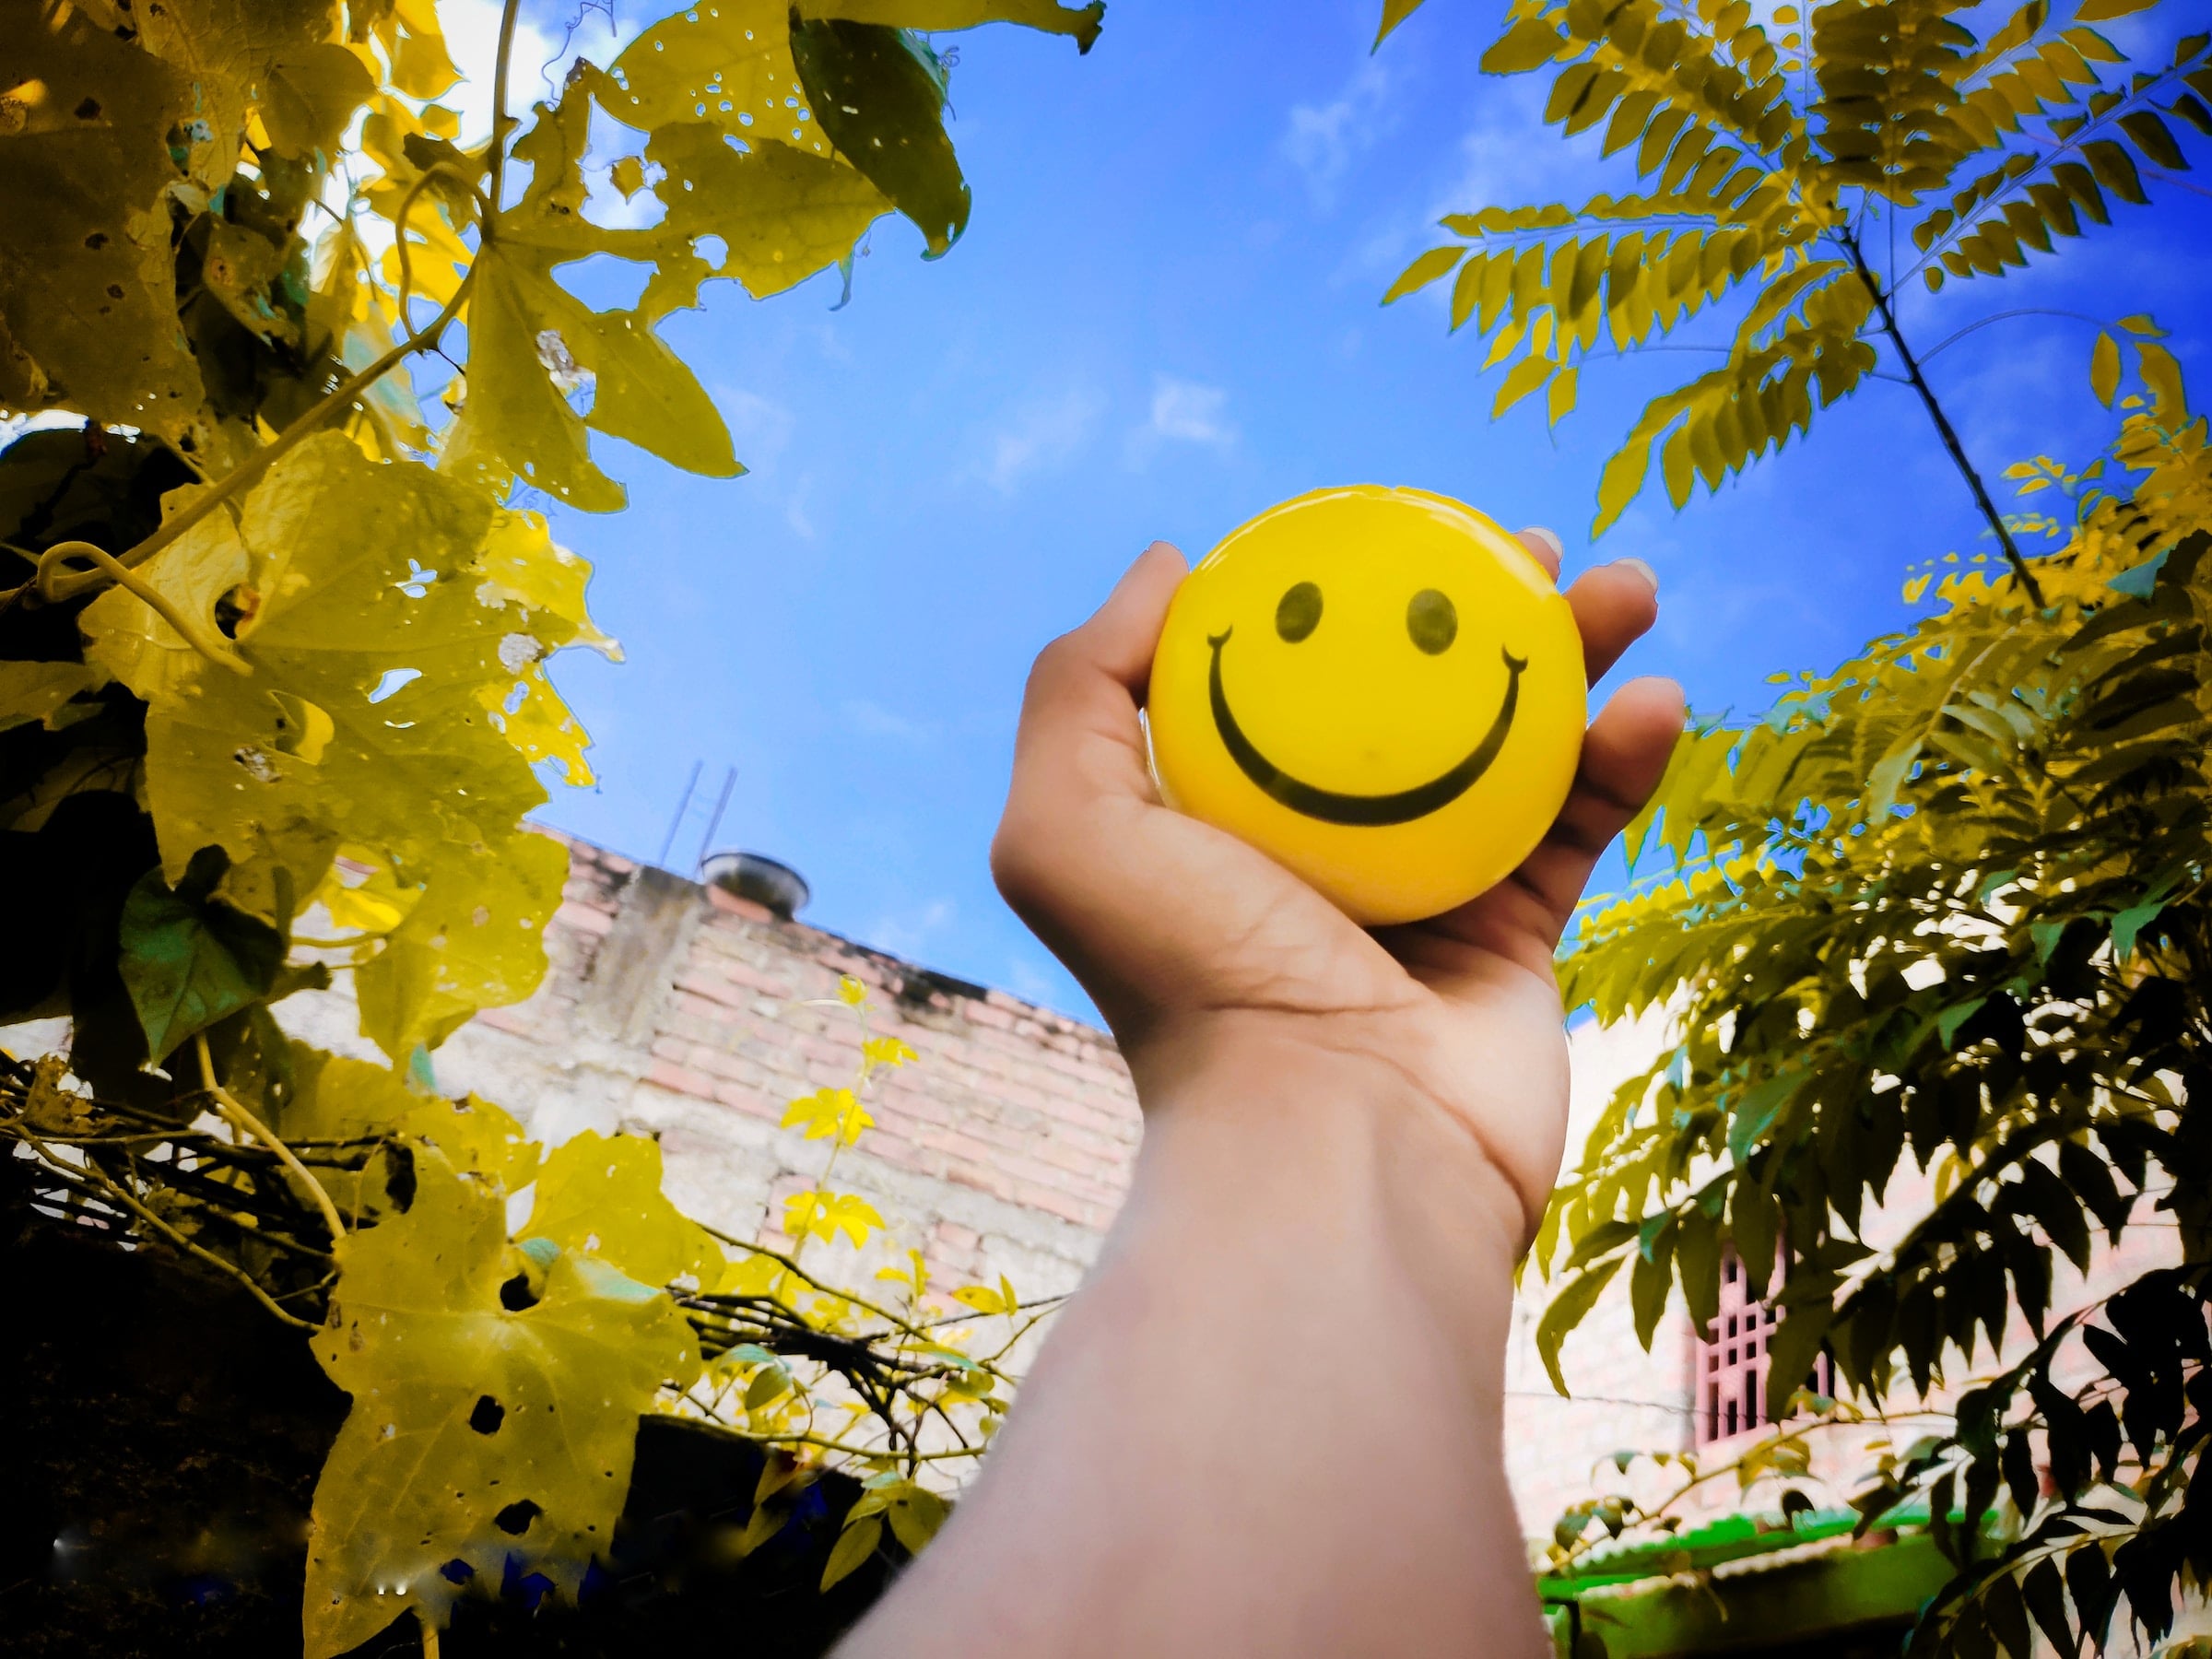 An image of a hand holding a smile face with leaves and the blue sky in the background.